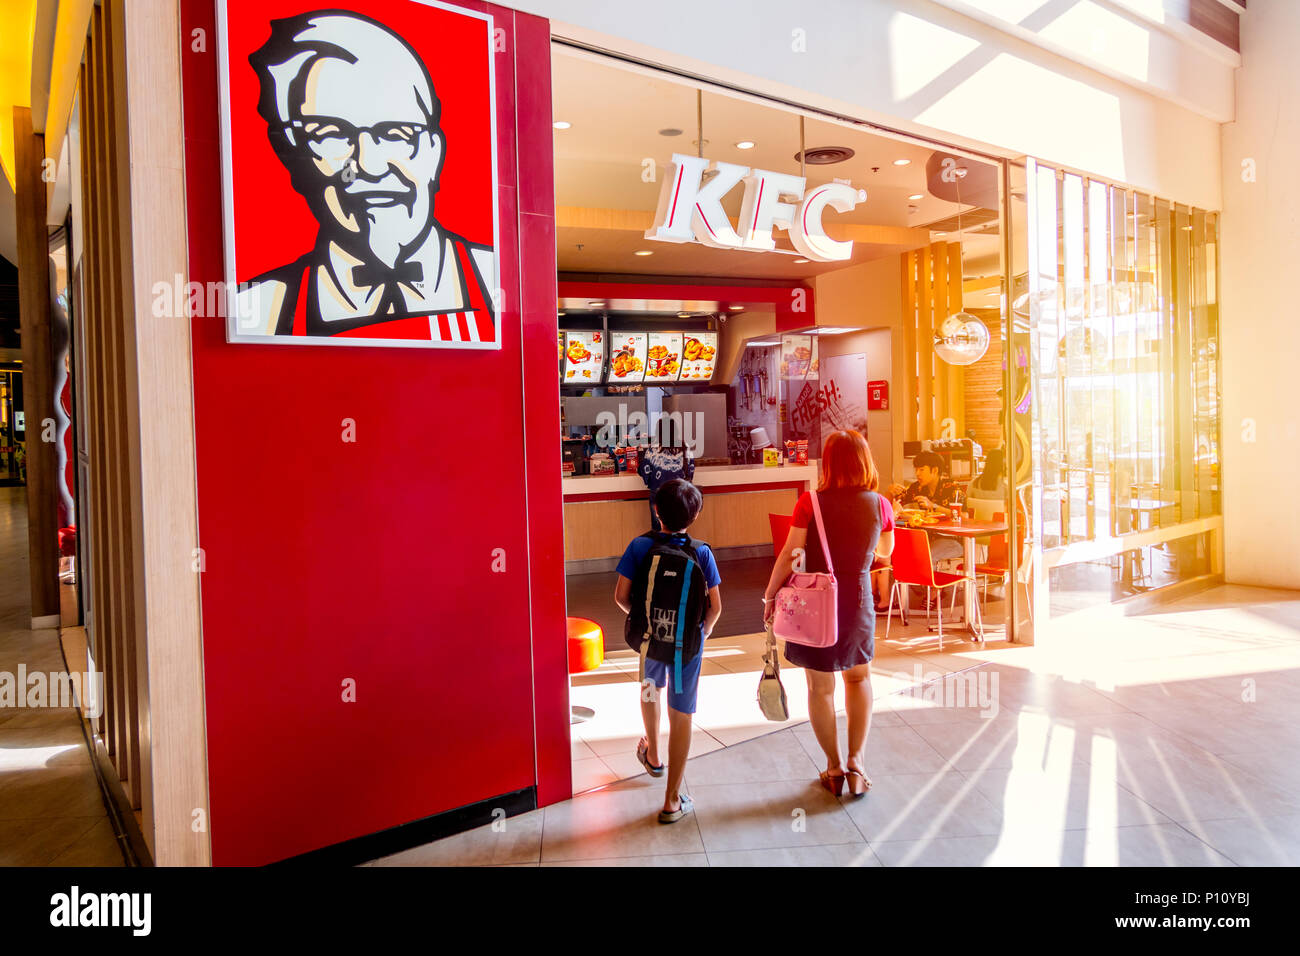 KFC (Kentucky Fried Chicken) shop in super market most popular fast food restaurant and a favorite of parents and kids for family eating together time Stock Photo